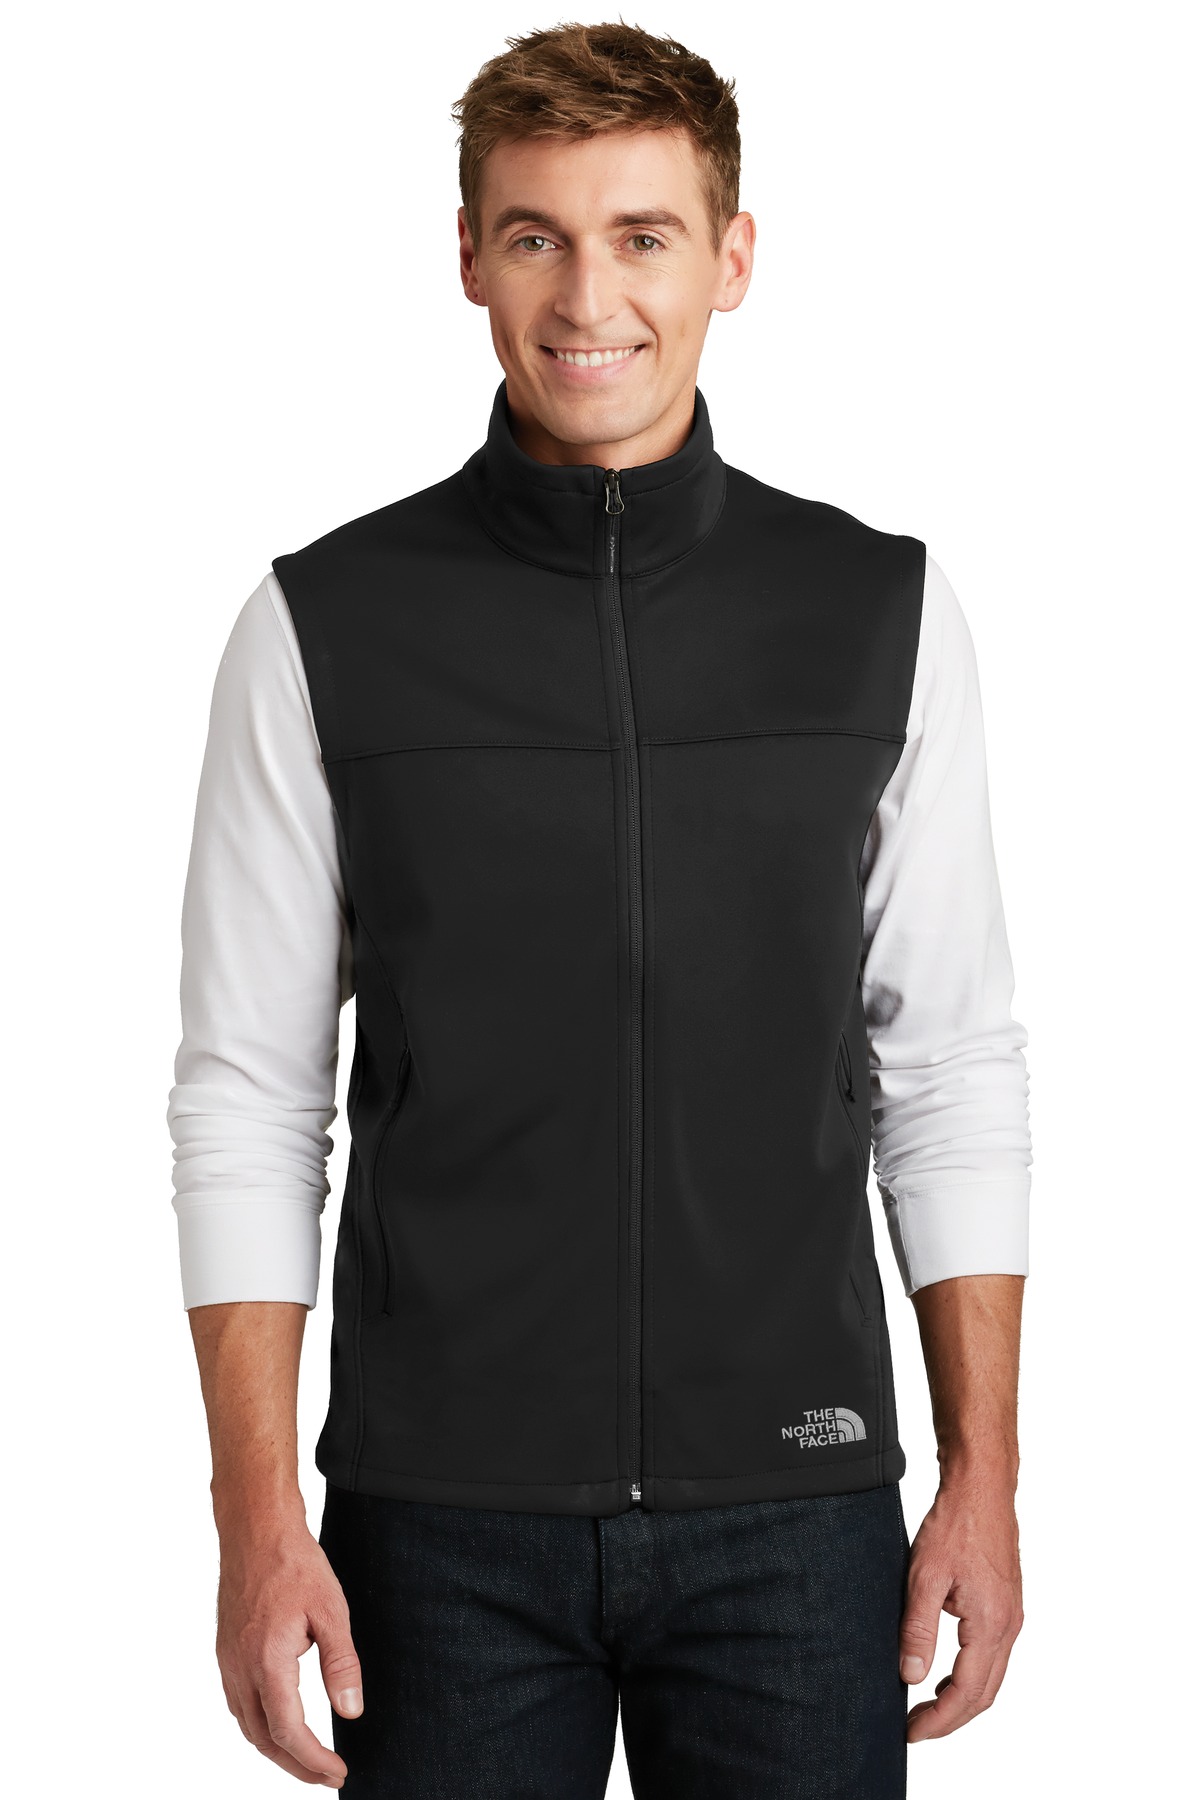 The North Face Industrial Outerwear ® Ridgeline Soft Shell Vest.-The North Face